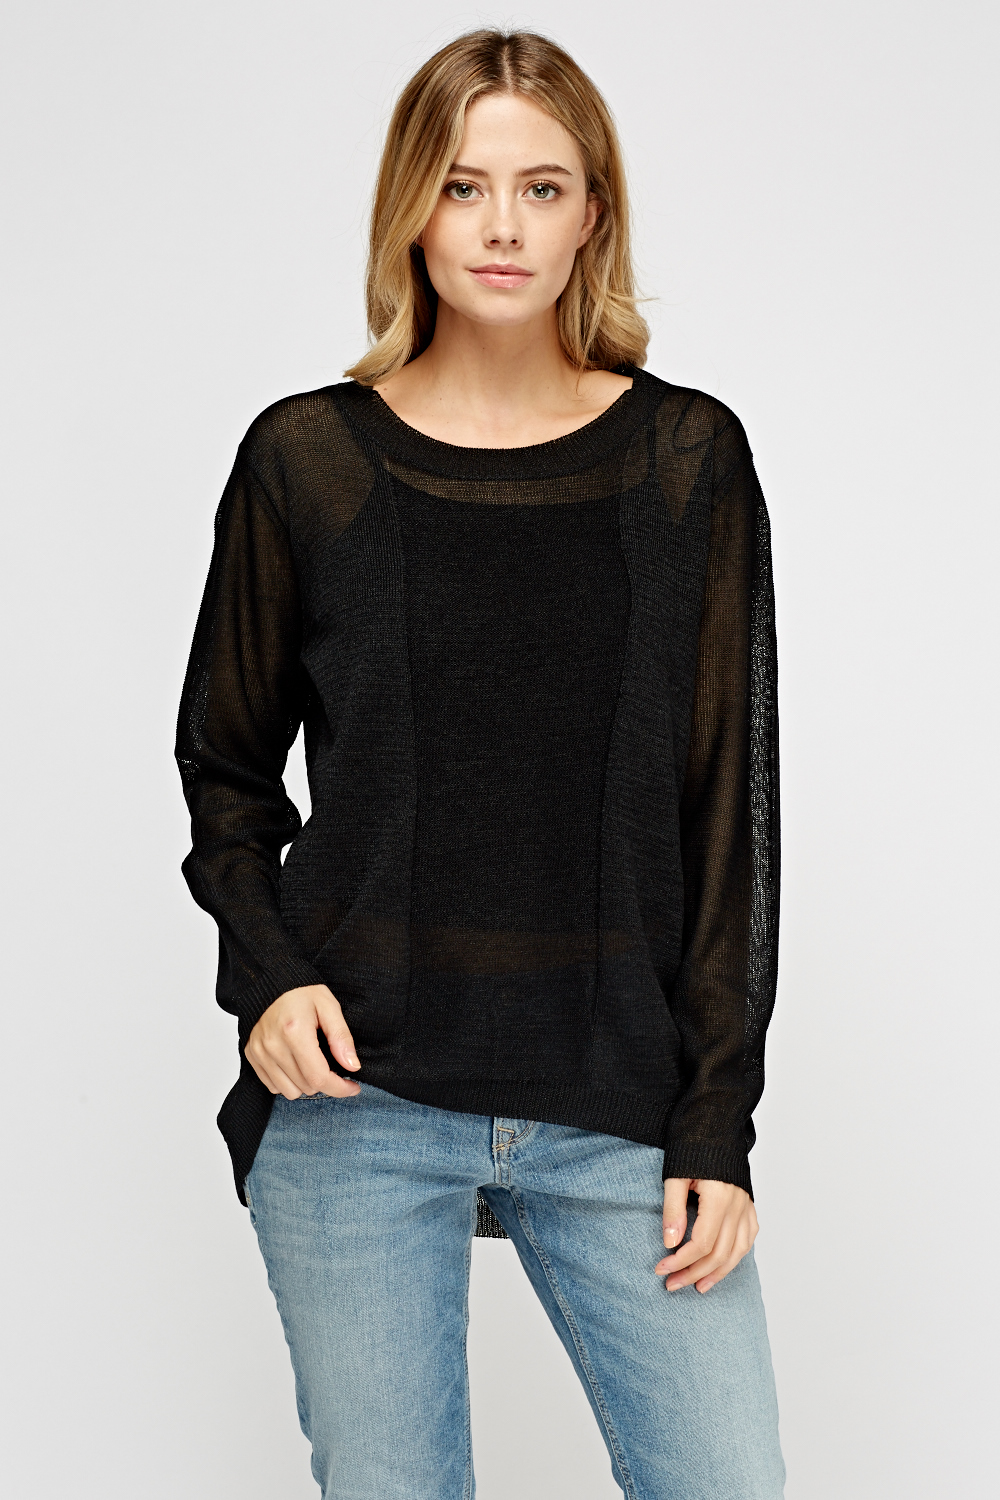 Loose Knit Thin Sweater - Just $3